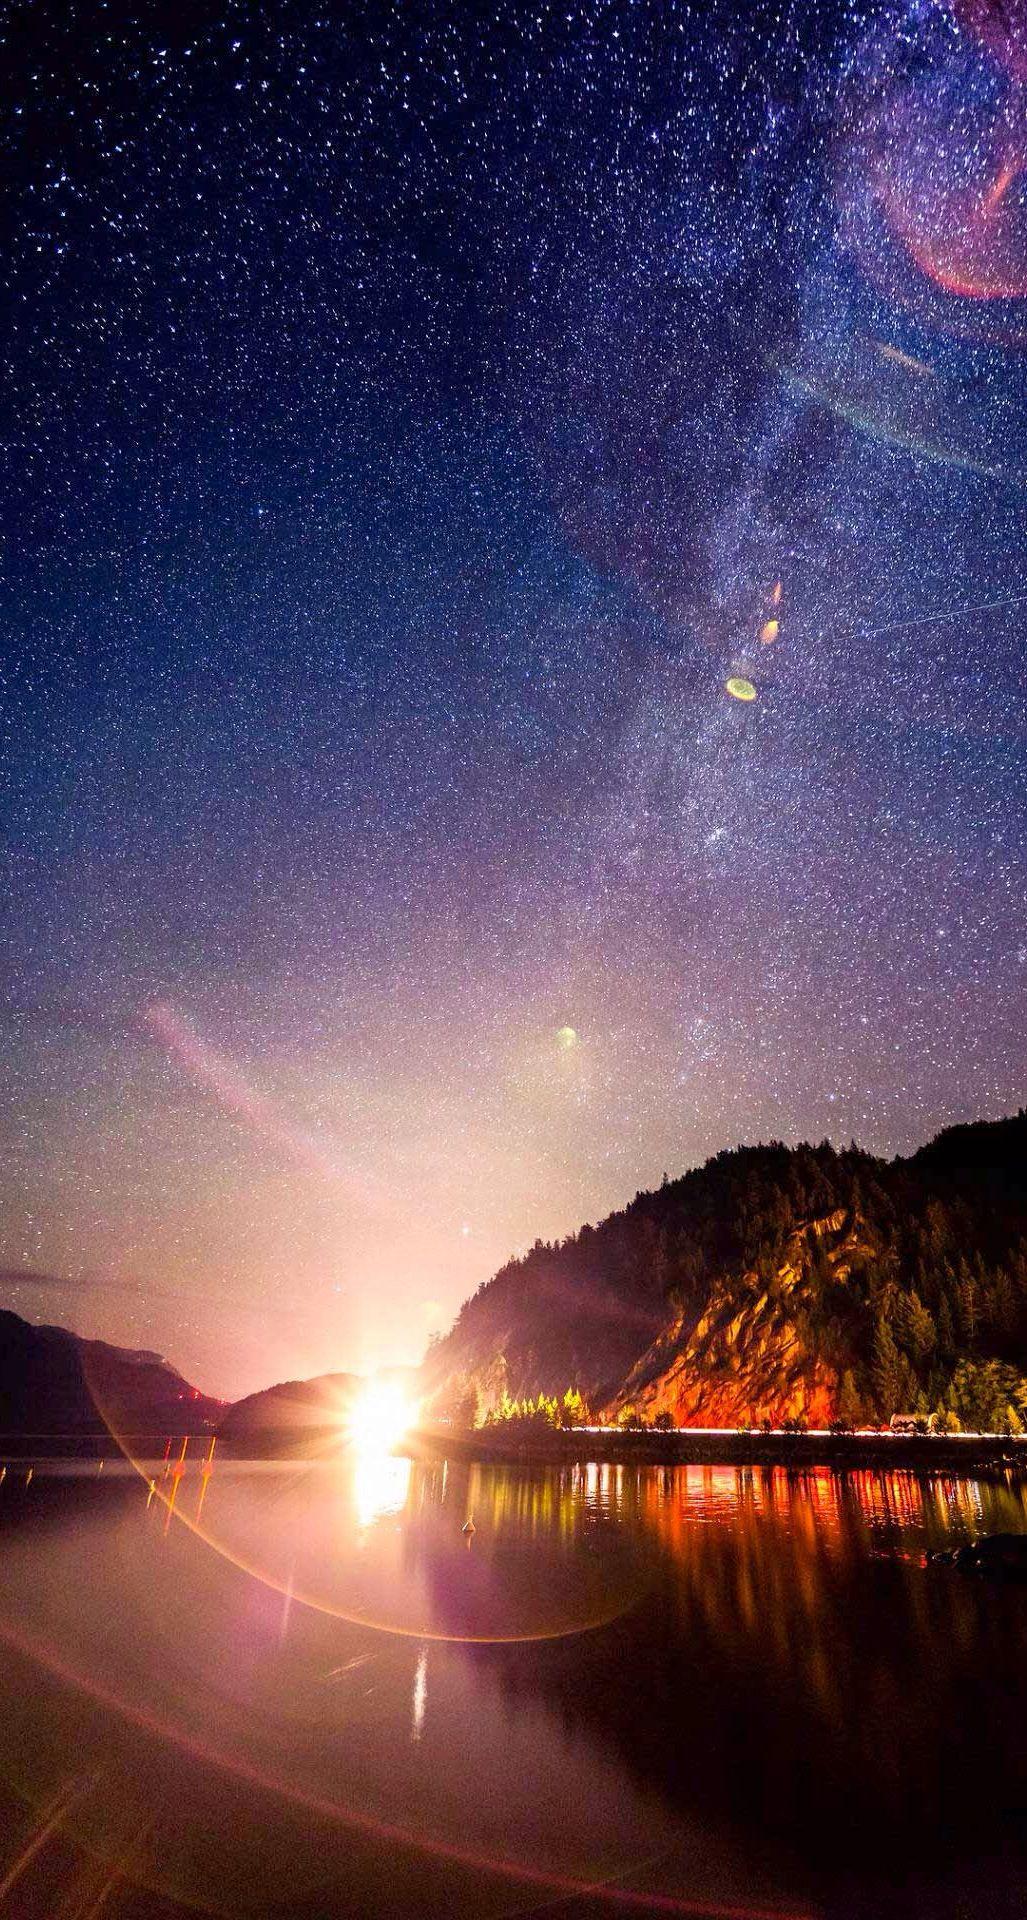 Milky Way. Calm your mood with these 10 Peaceful Evening Scenery